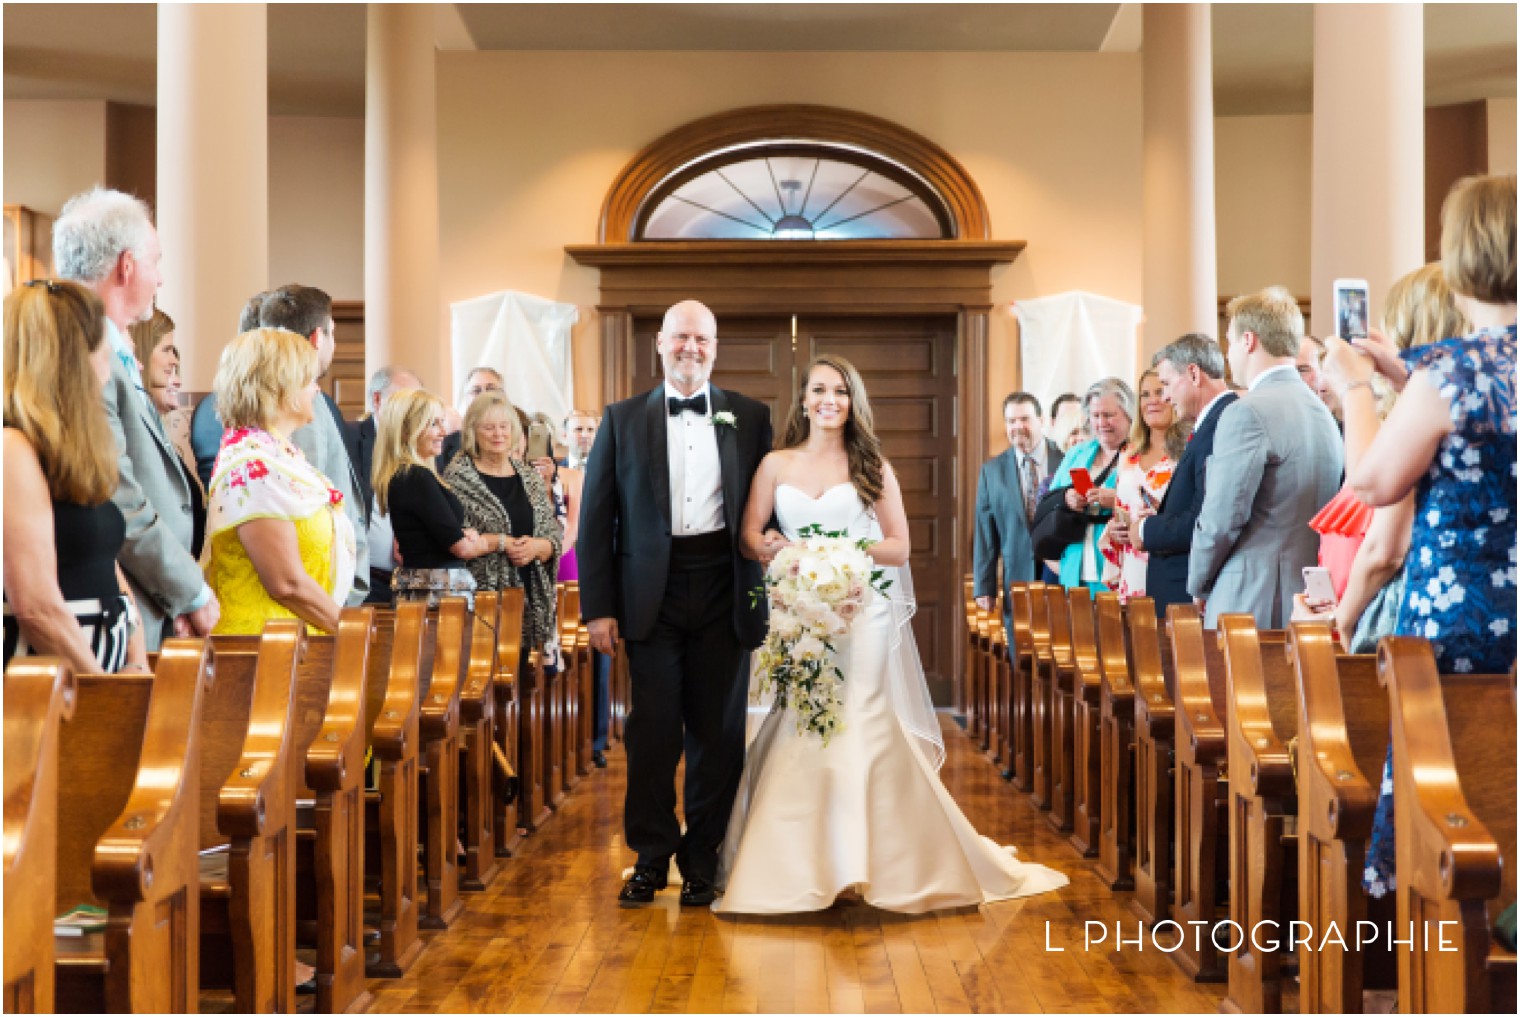 L Photographie Saint Louis wedding photography Old Cathedral Four Seasons Cosmopolitan Events_0028.jpg